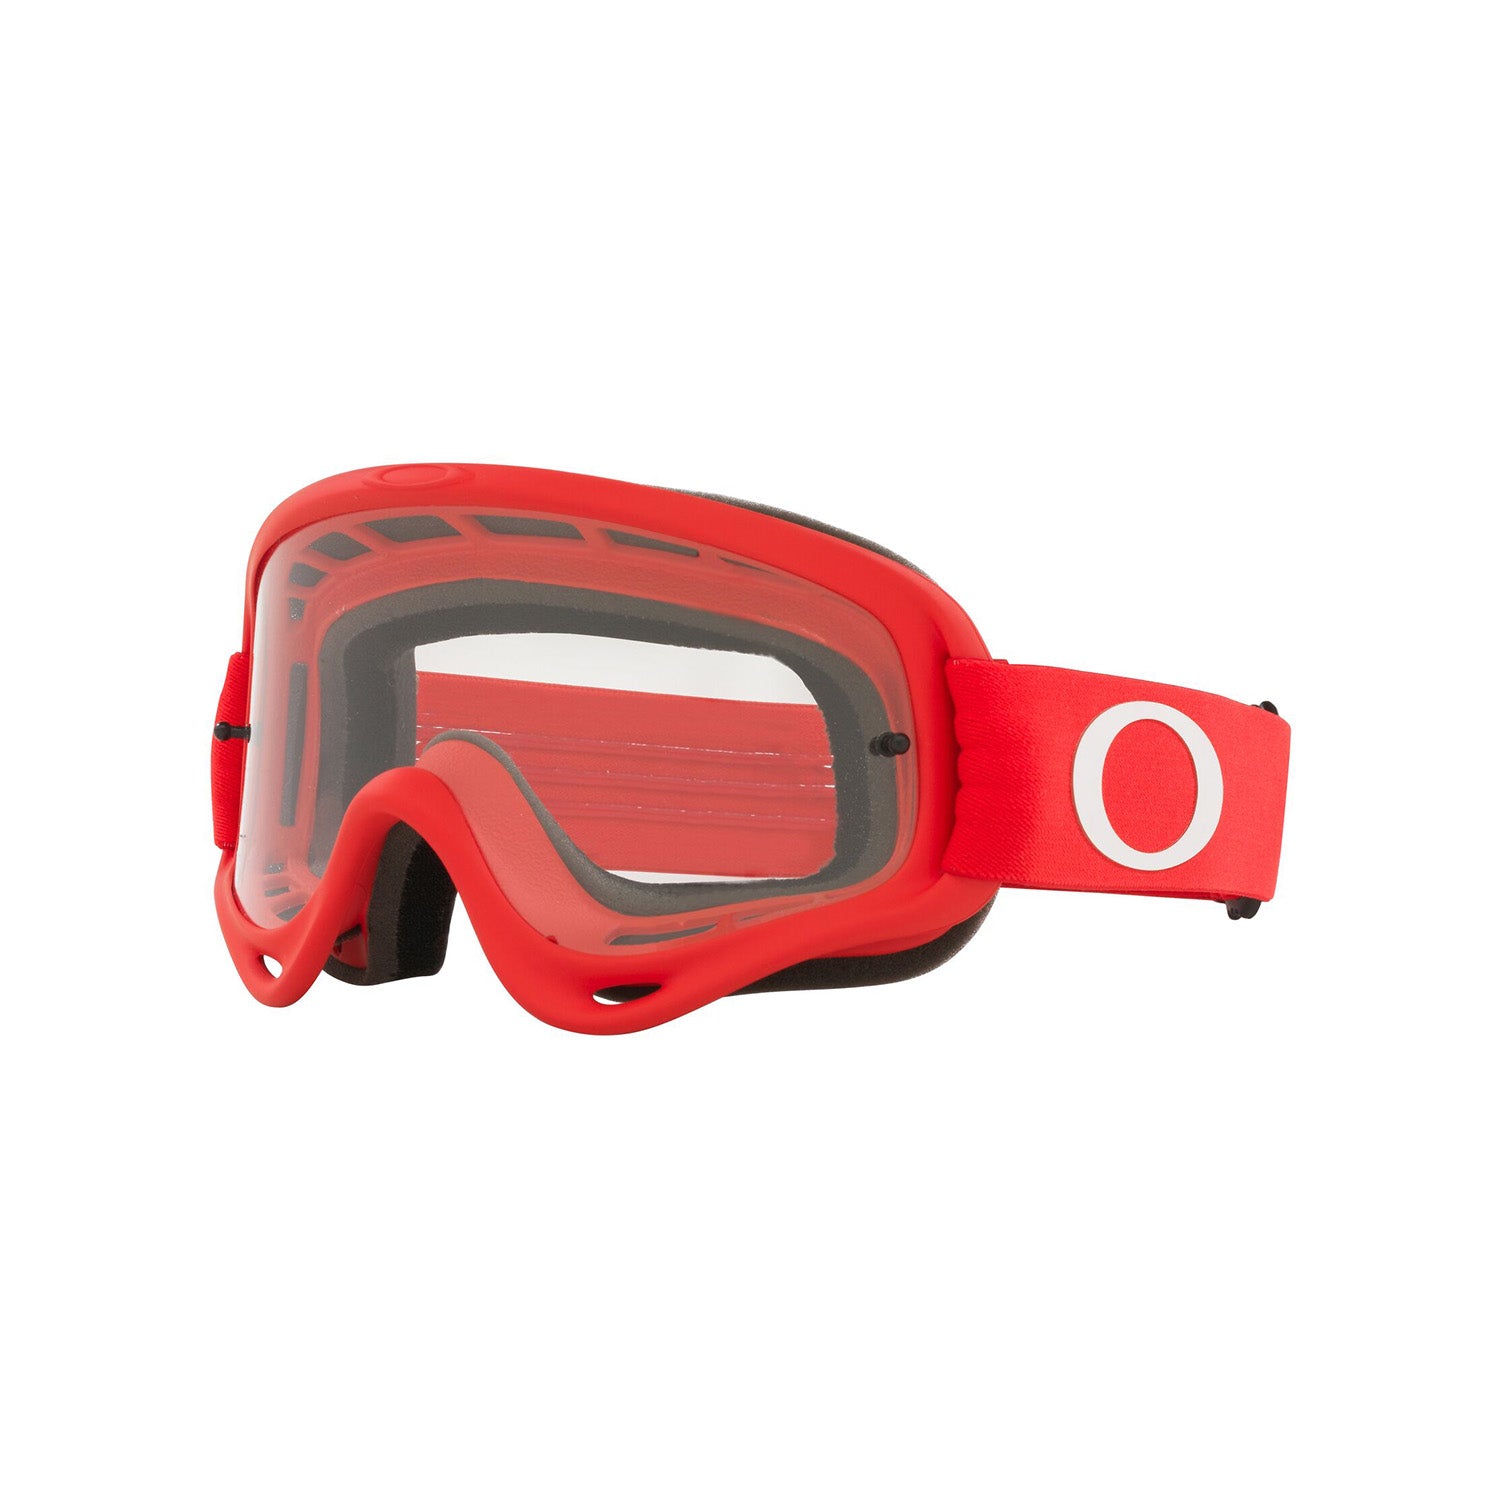 Oakley O Frame MX Goggle in Moto Red with Clear Lens